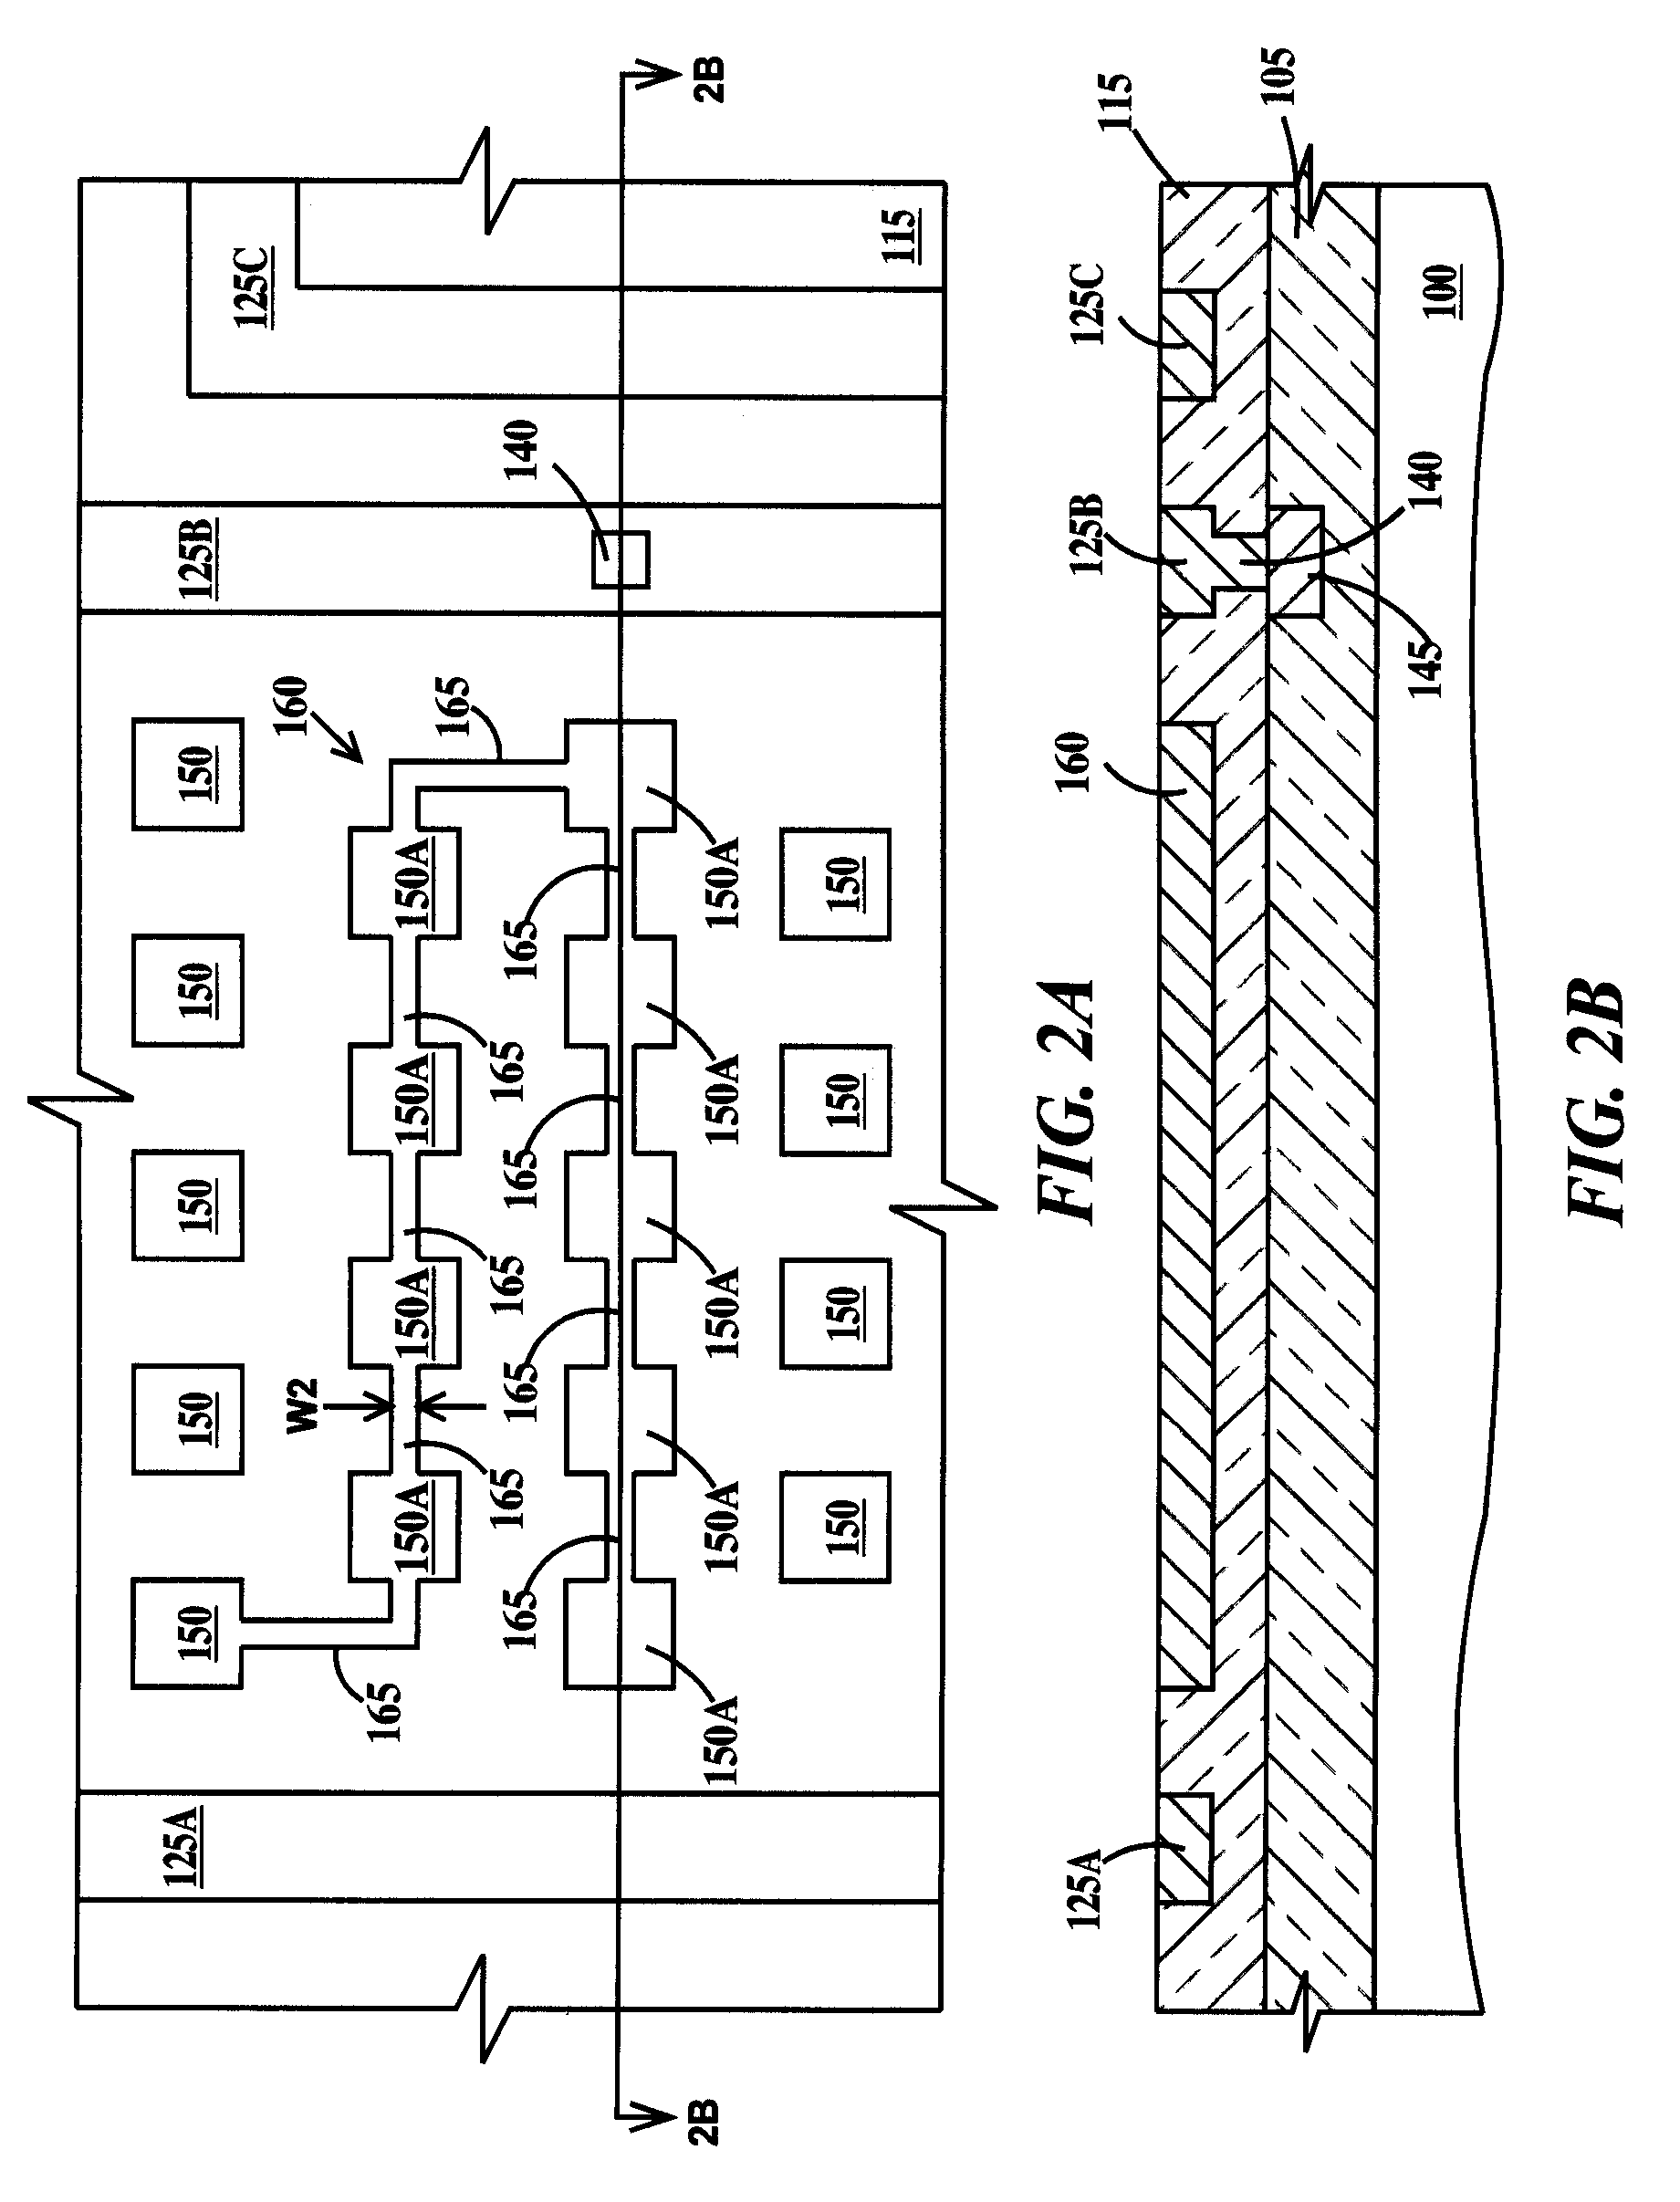 Method of adding fabrication monitors to integrated circuit chips